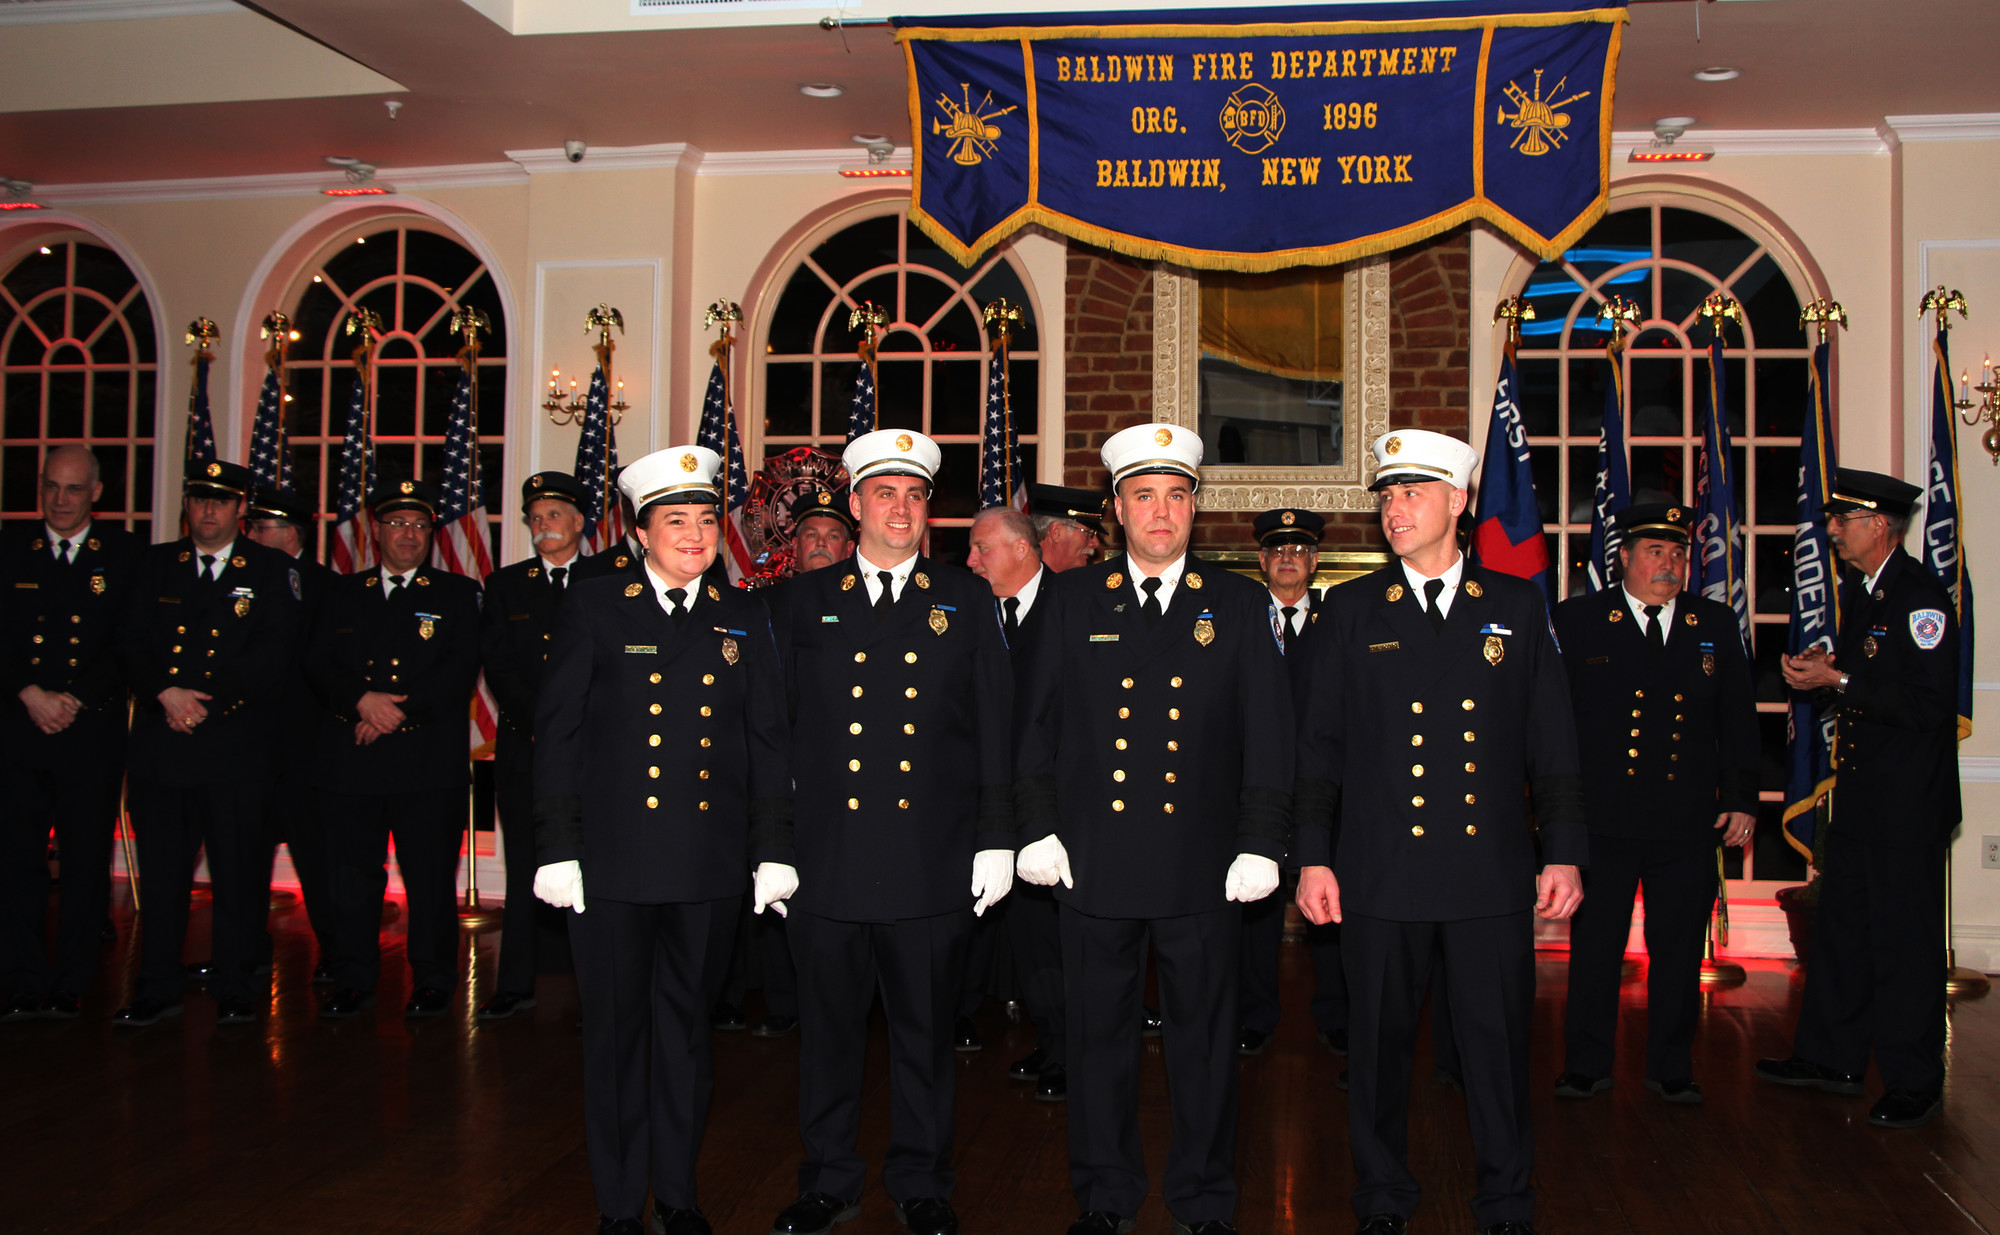 Karen Bendel, at left in front, was sworn in as the Baldwin Fire Department’s first female chief on March 28 during the organization’s 120th installation ceremony. Also, deputy chiefs, from left, Michael Jazylo (first), Frank Cesare (second) and Michael Esposito (third), took their oaths.